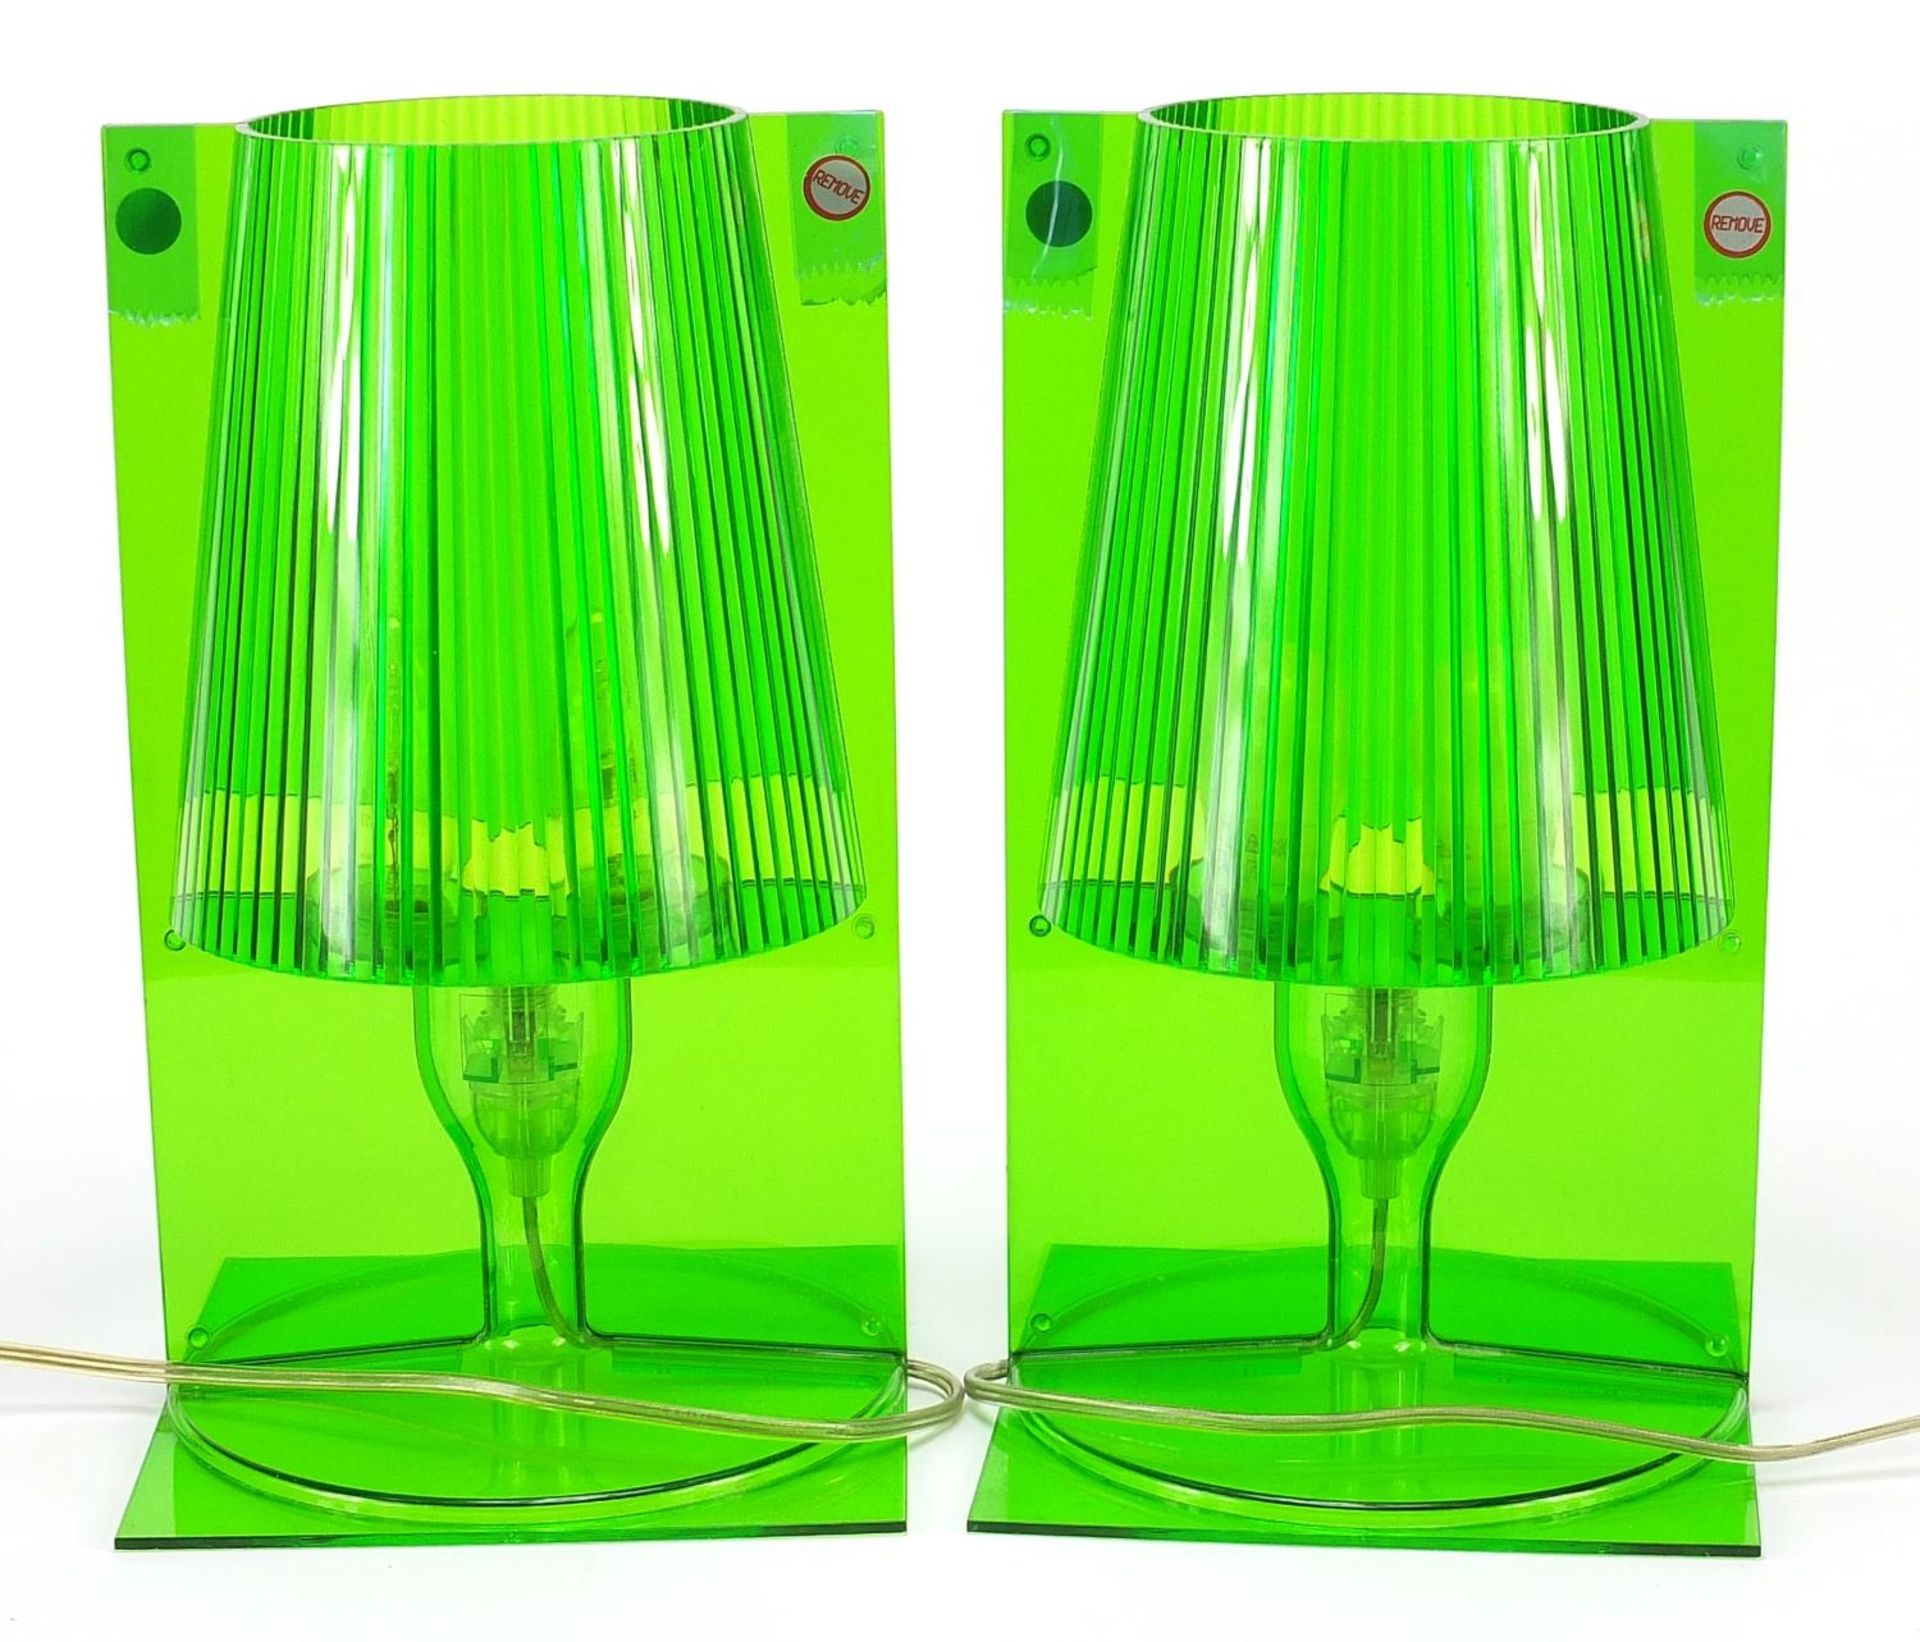 Ferruccio Laviani for Kartell, Pair of Take green Perspex table lamps, 30cm high